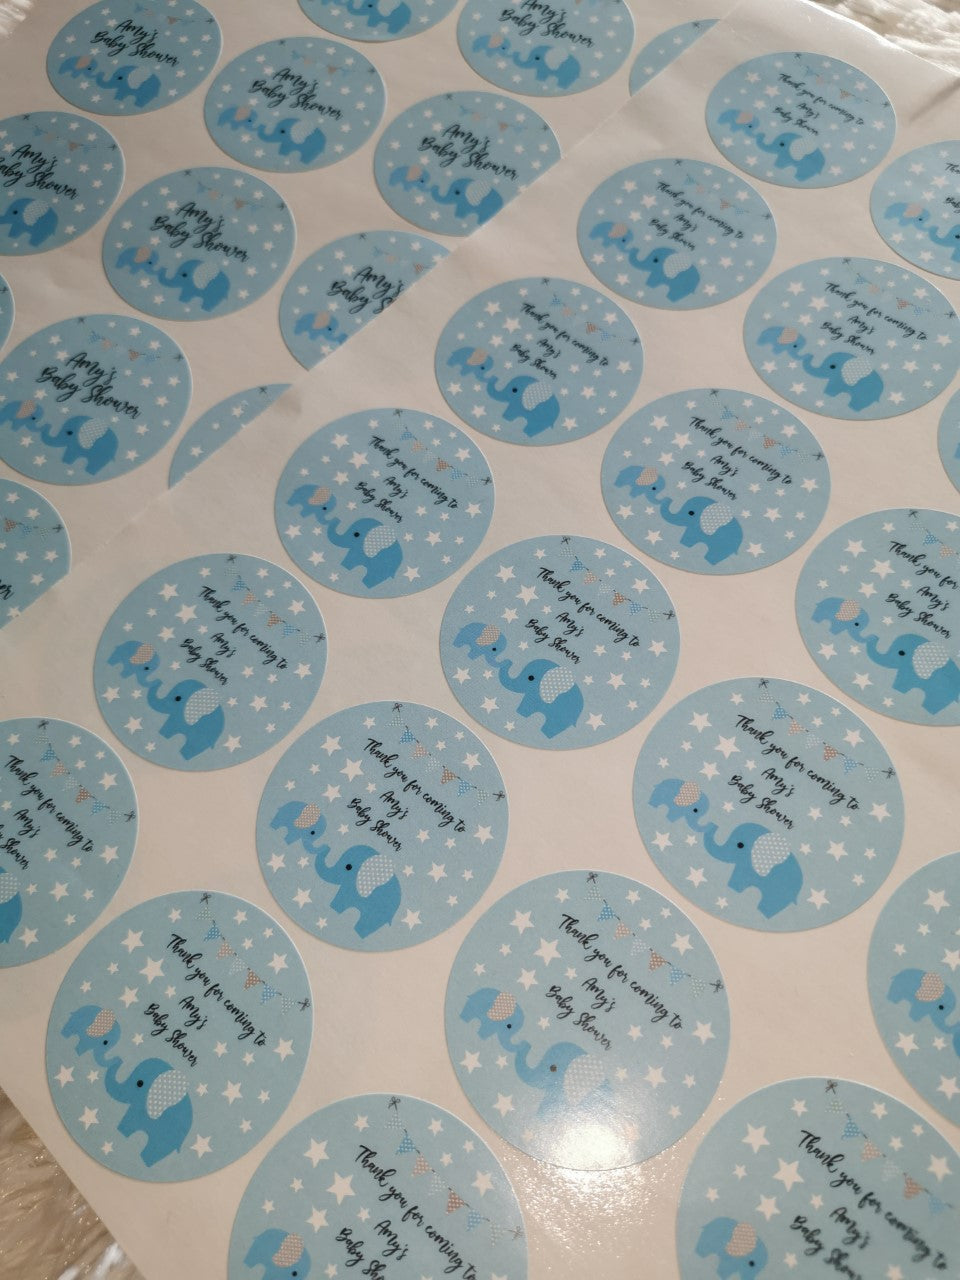 Baby Shower Stickers | Baby shower Blue Elephant stickers | Stickers | Personalised Stickers